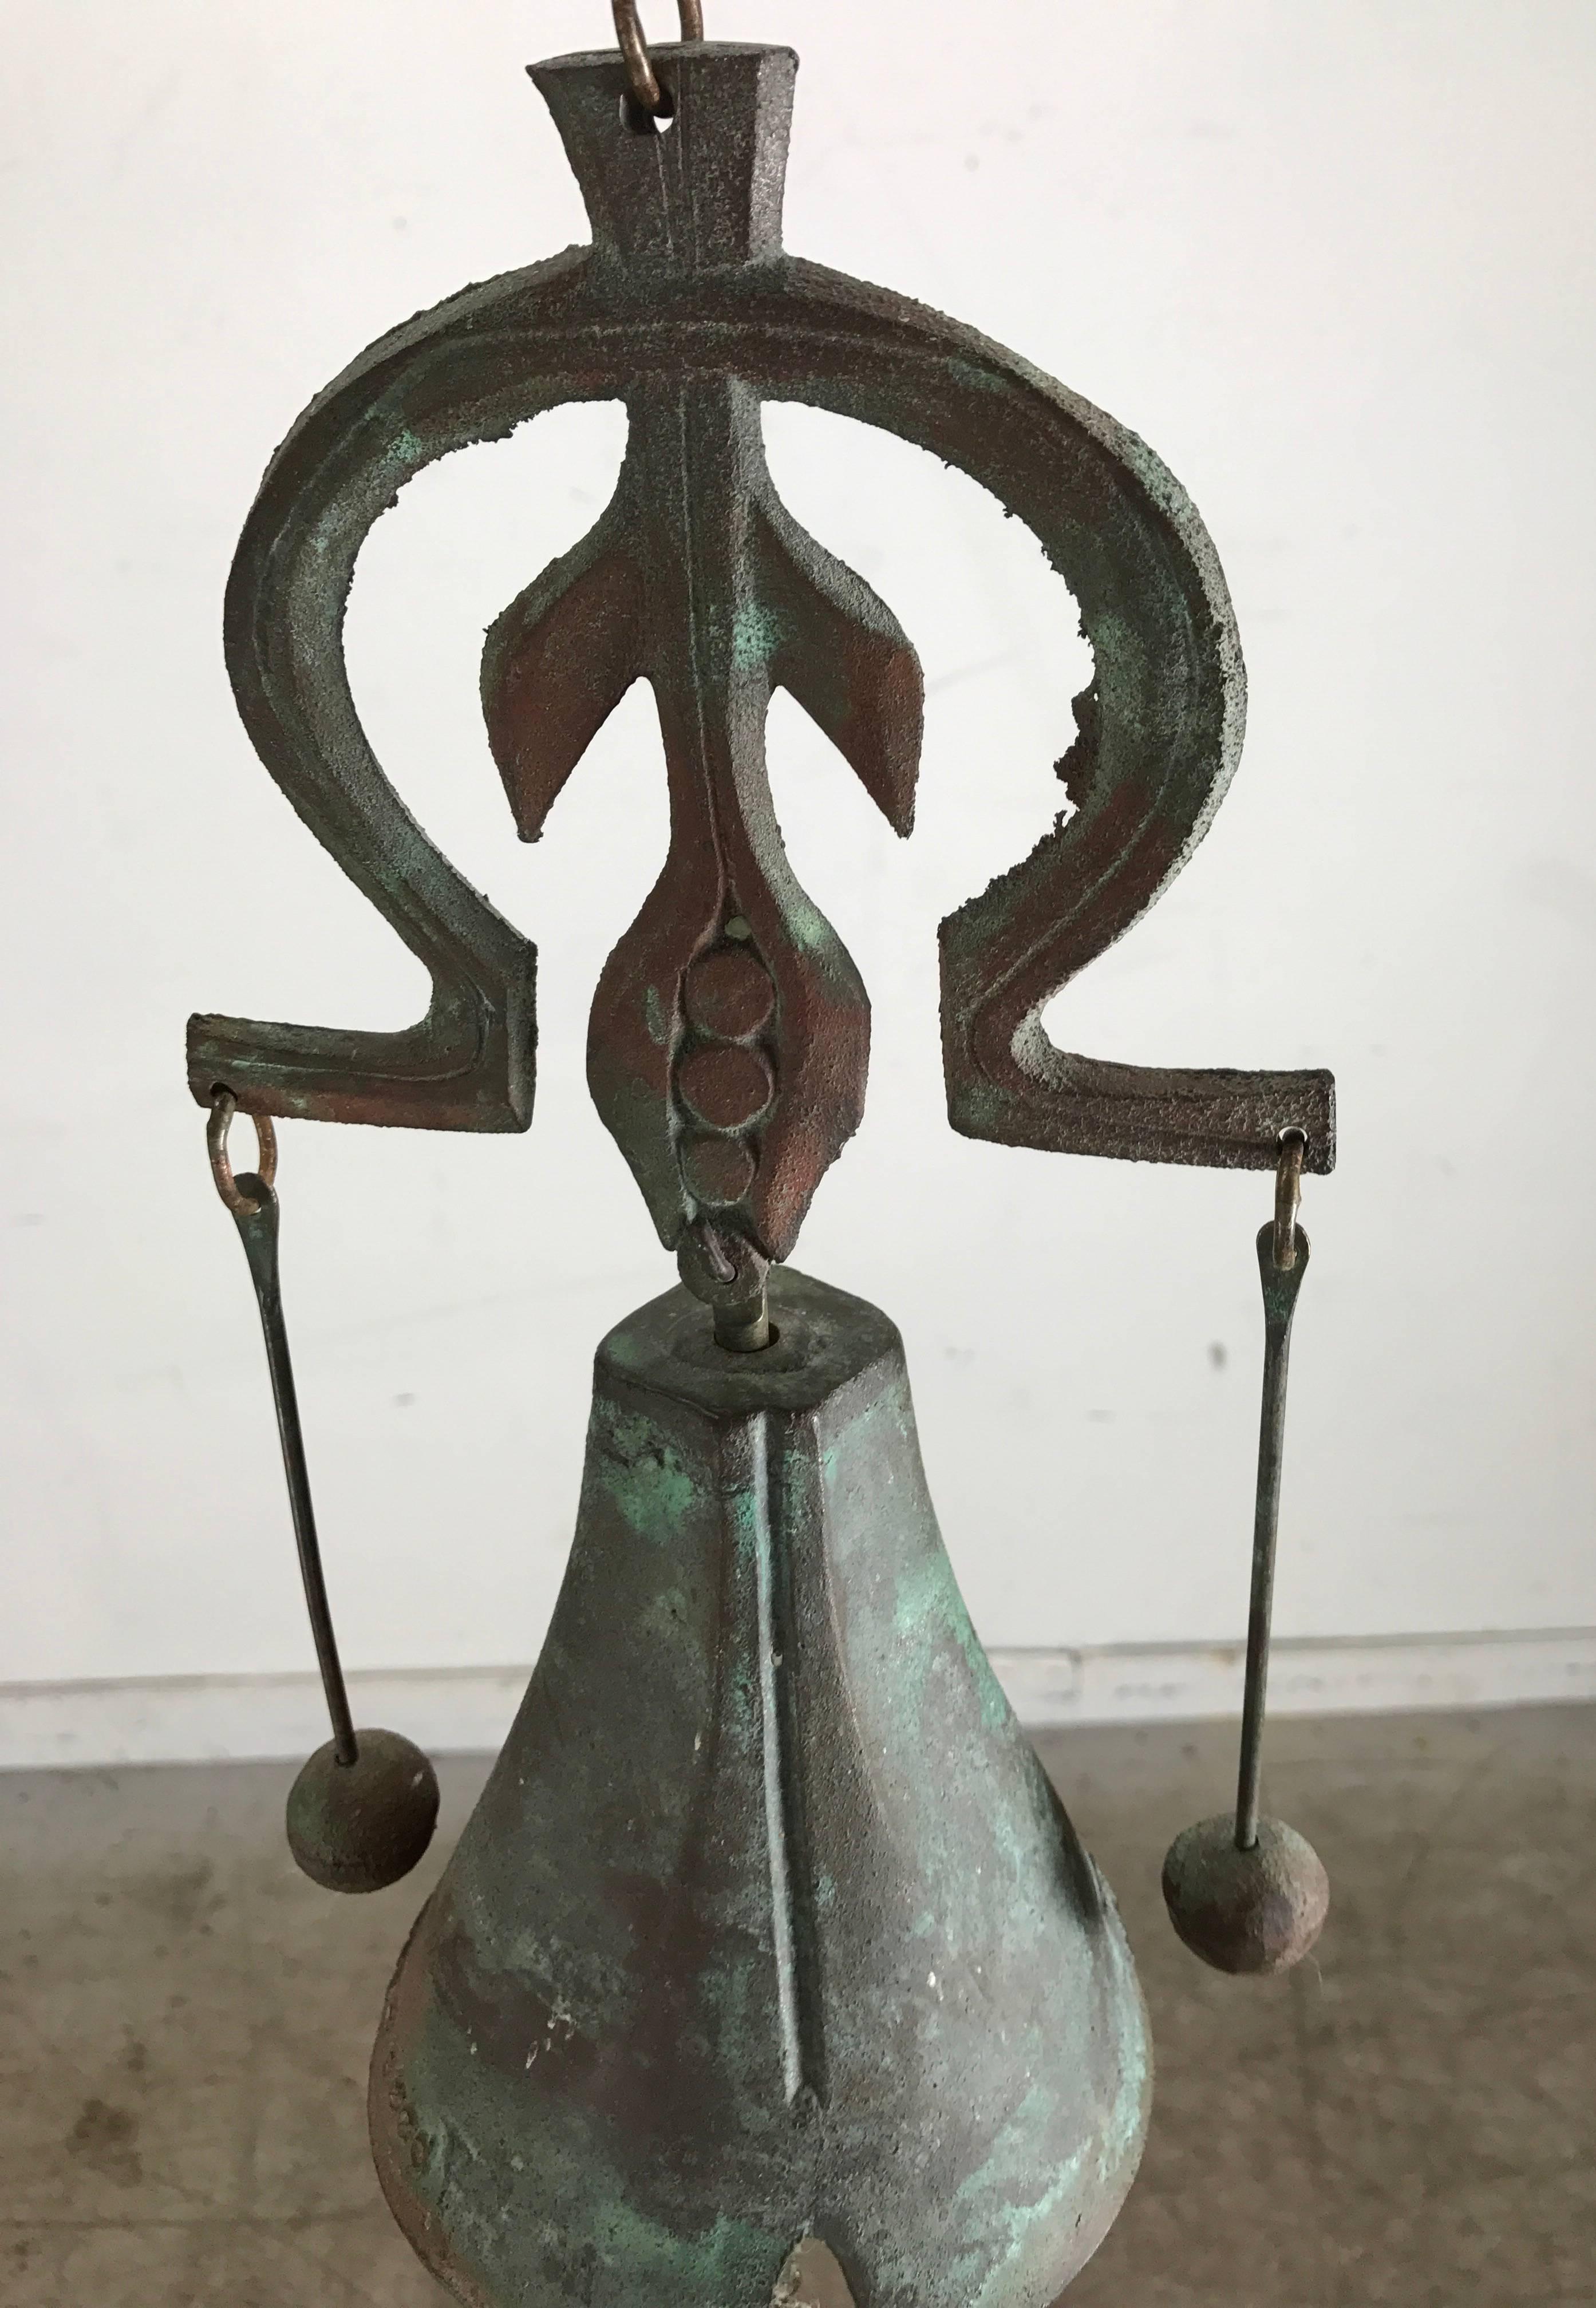 Unusual cast bronze wind bell designed by Paolo Soleri, makers mark,

USA, circa 1970s.

Measures: Overall H 30
Bell diameter 5
Chime W 4.5

Cast bronze.
Original condition.
    